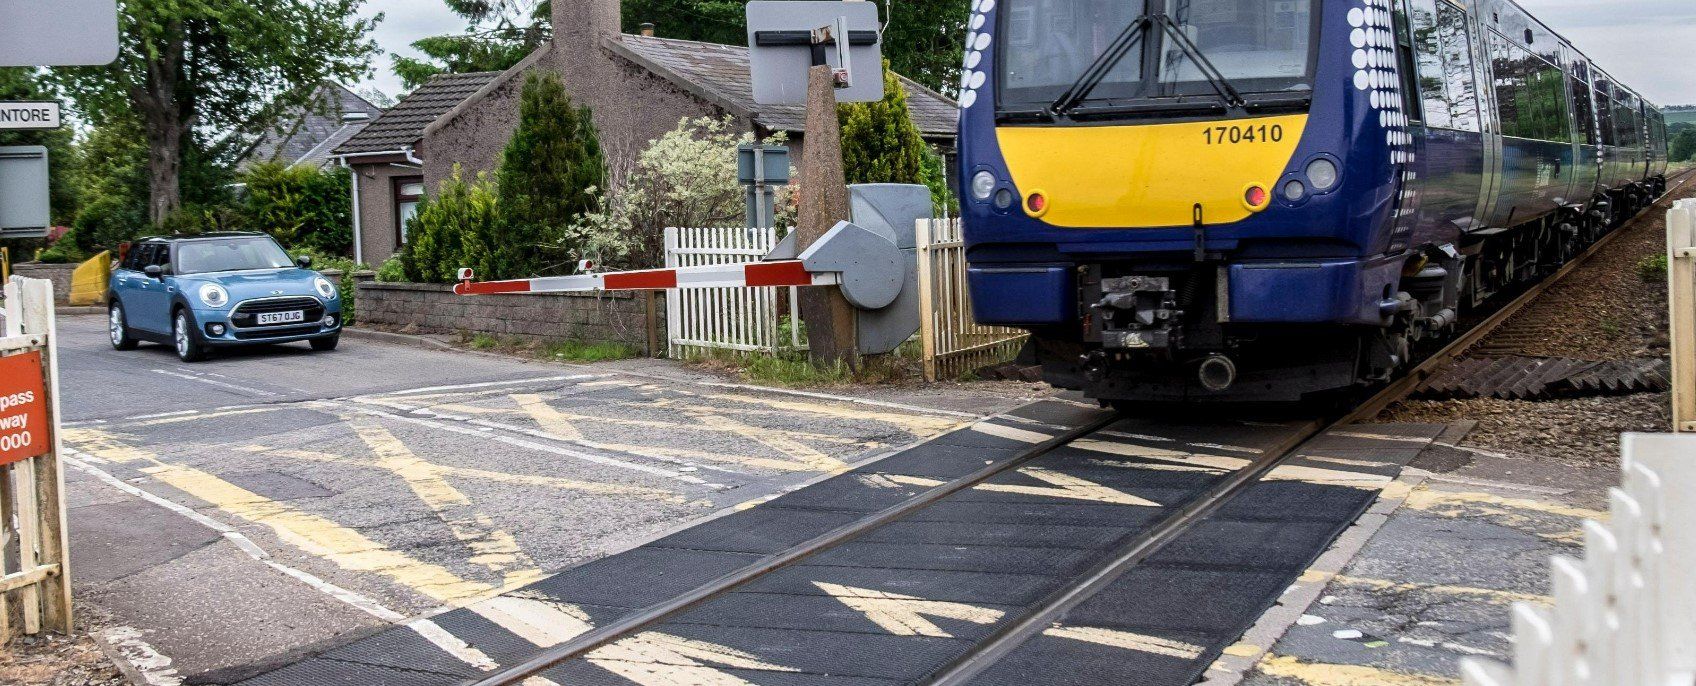 Photograph of train under tracks while a car waits for the level crossing gate to open